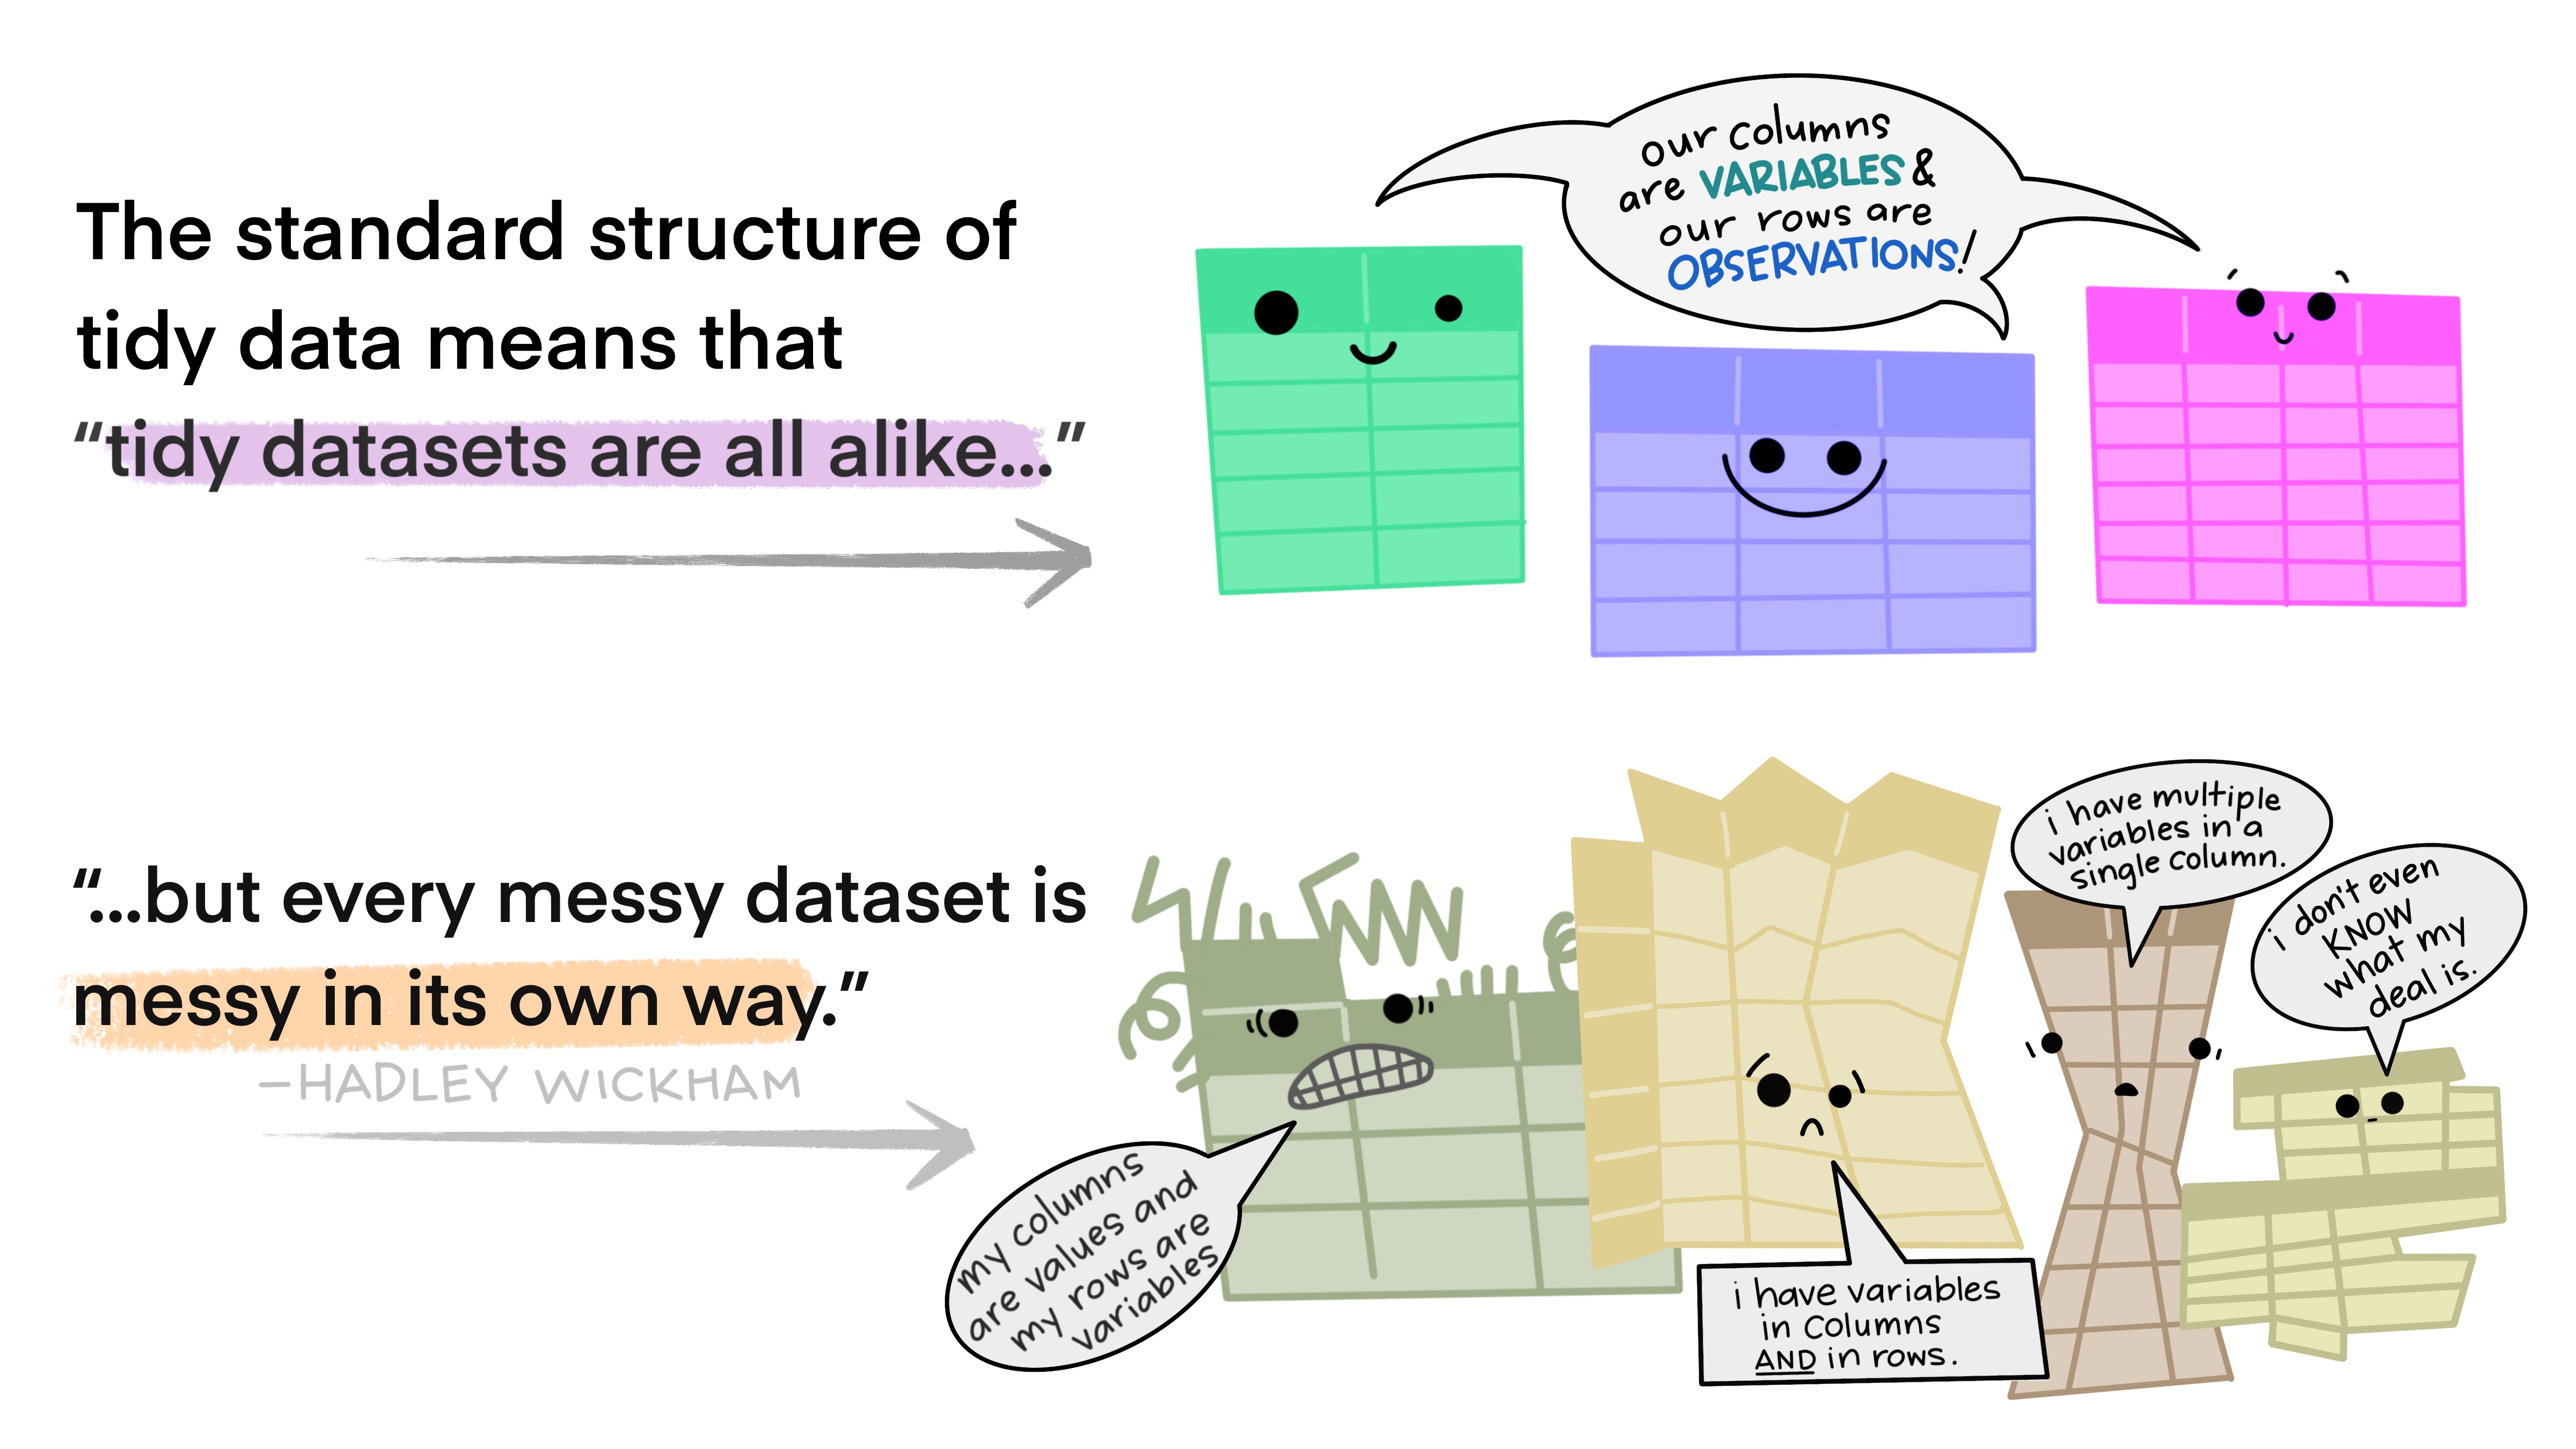 tidy datasets are all alike, but messy datasets are all unique